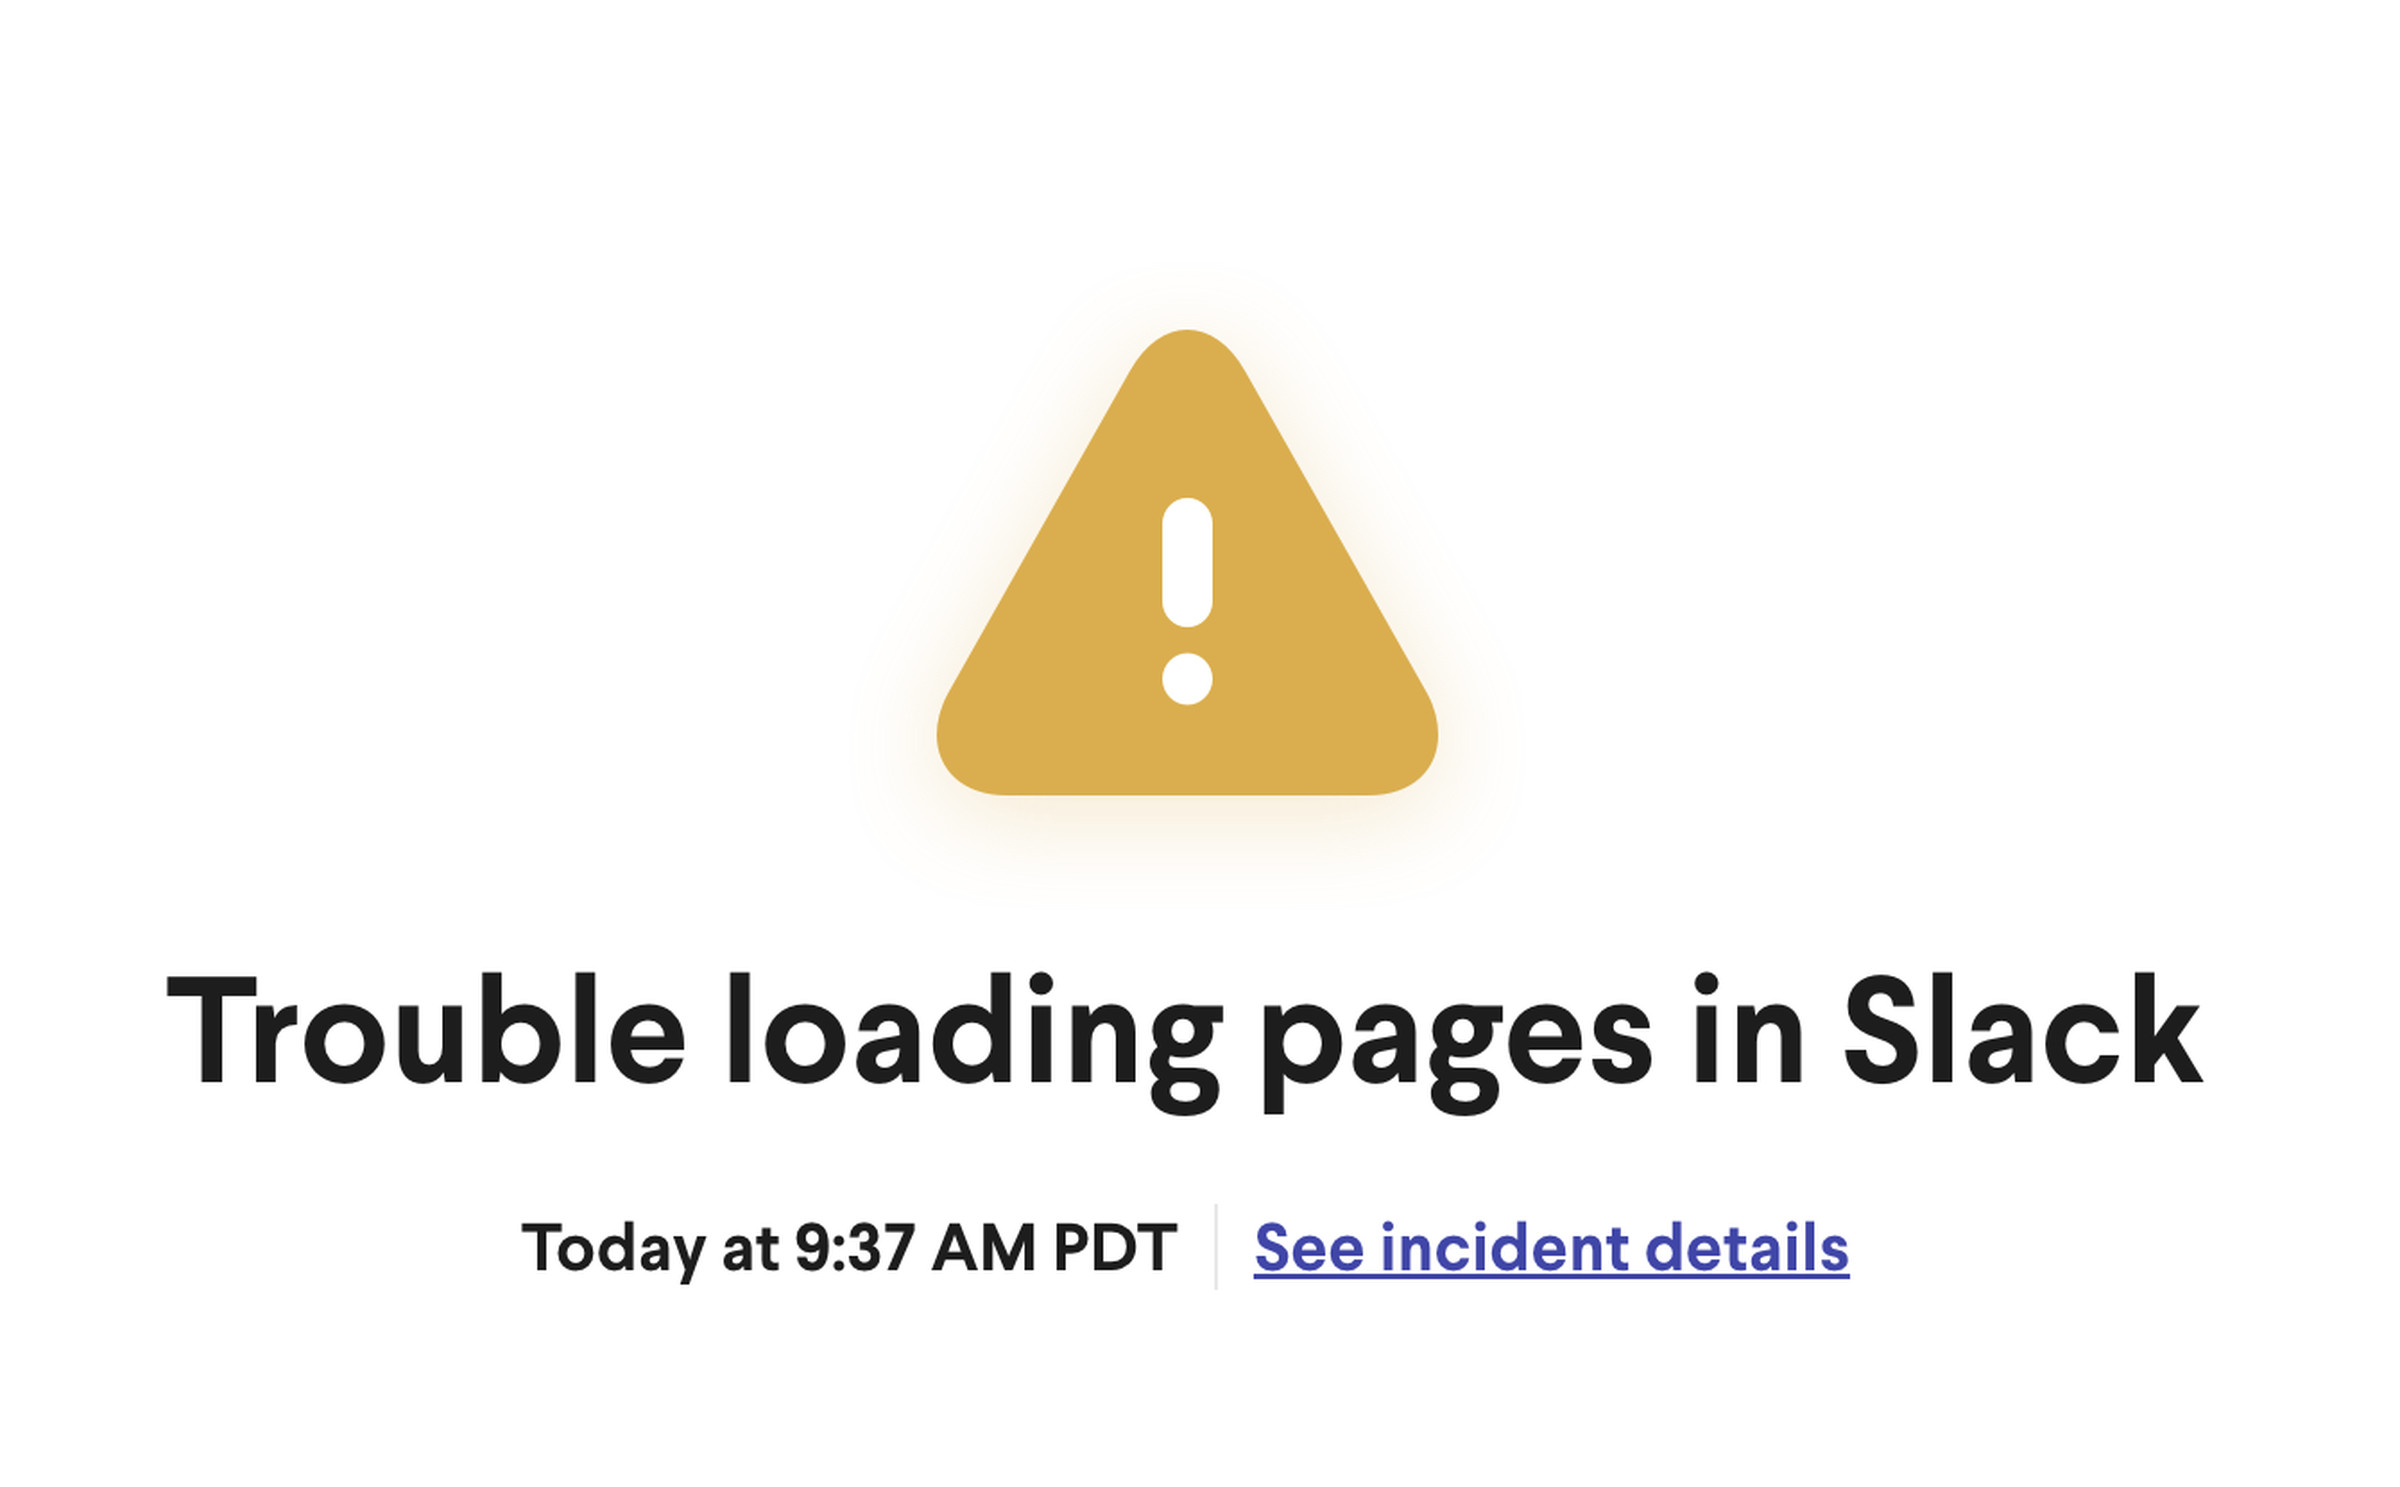 An error message from Slack’s status page.